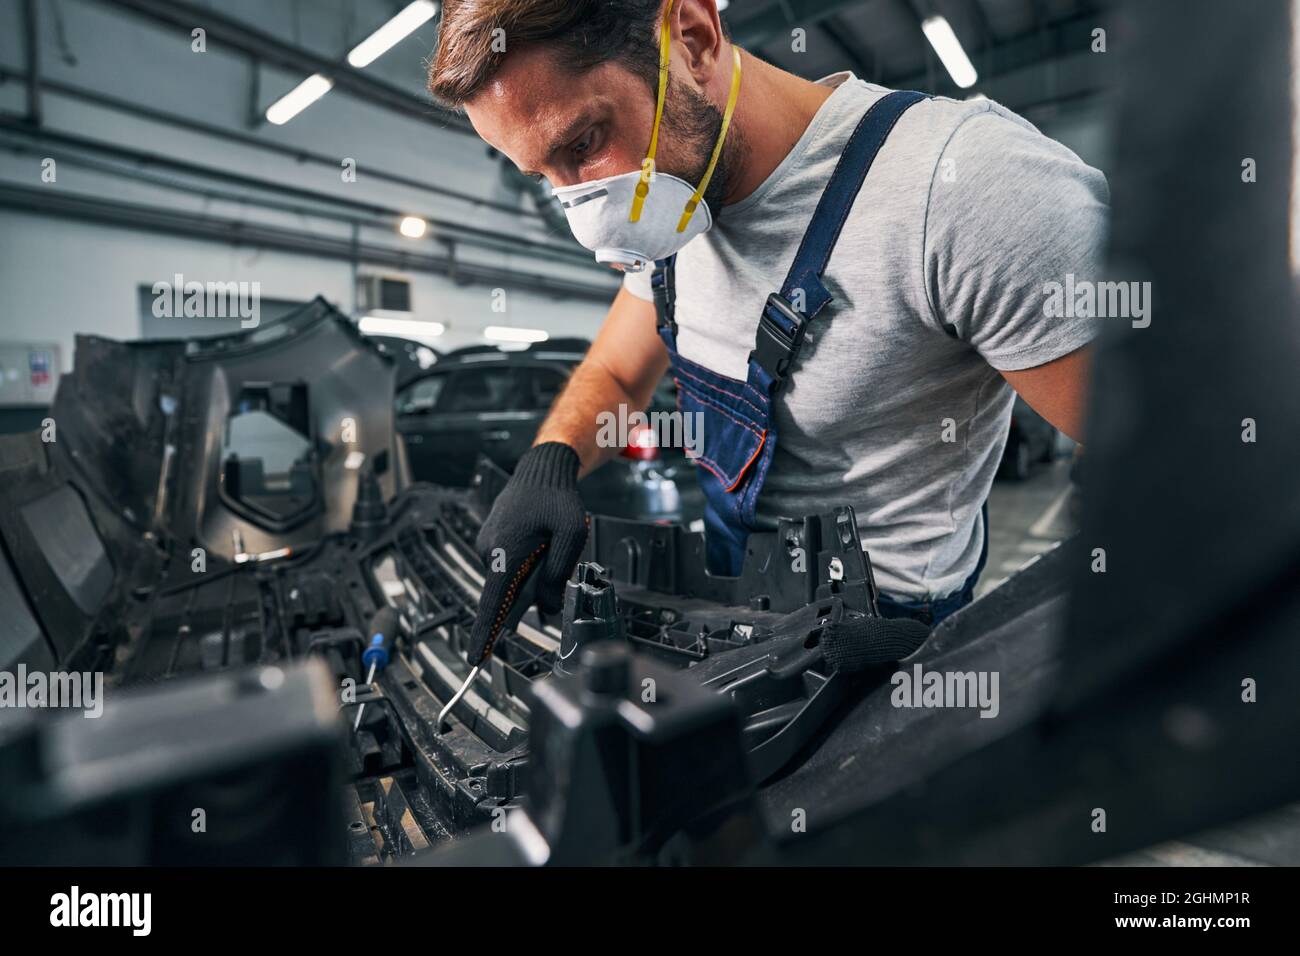 Repairman checking spare part condition with wrench Stock Photo